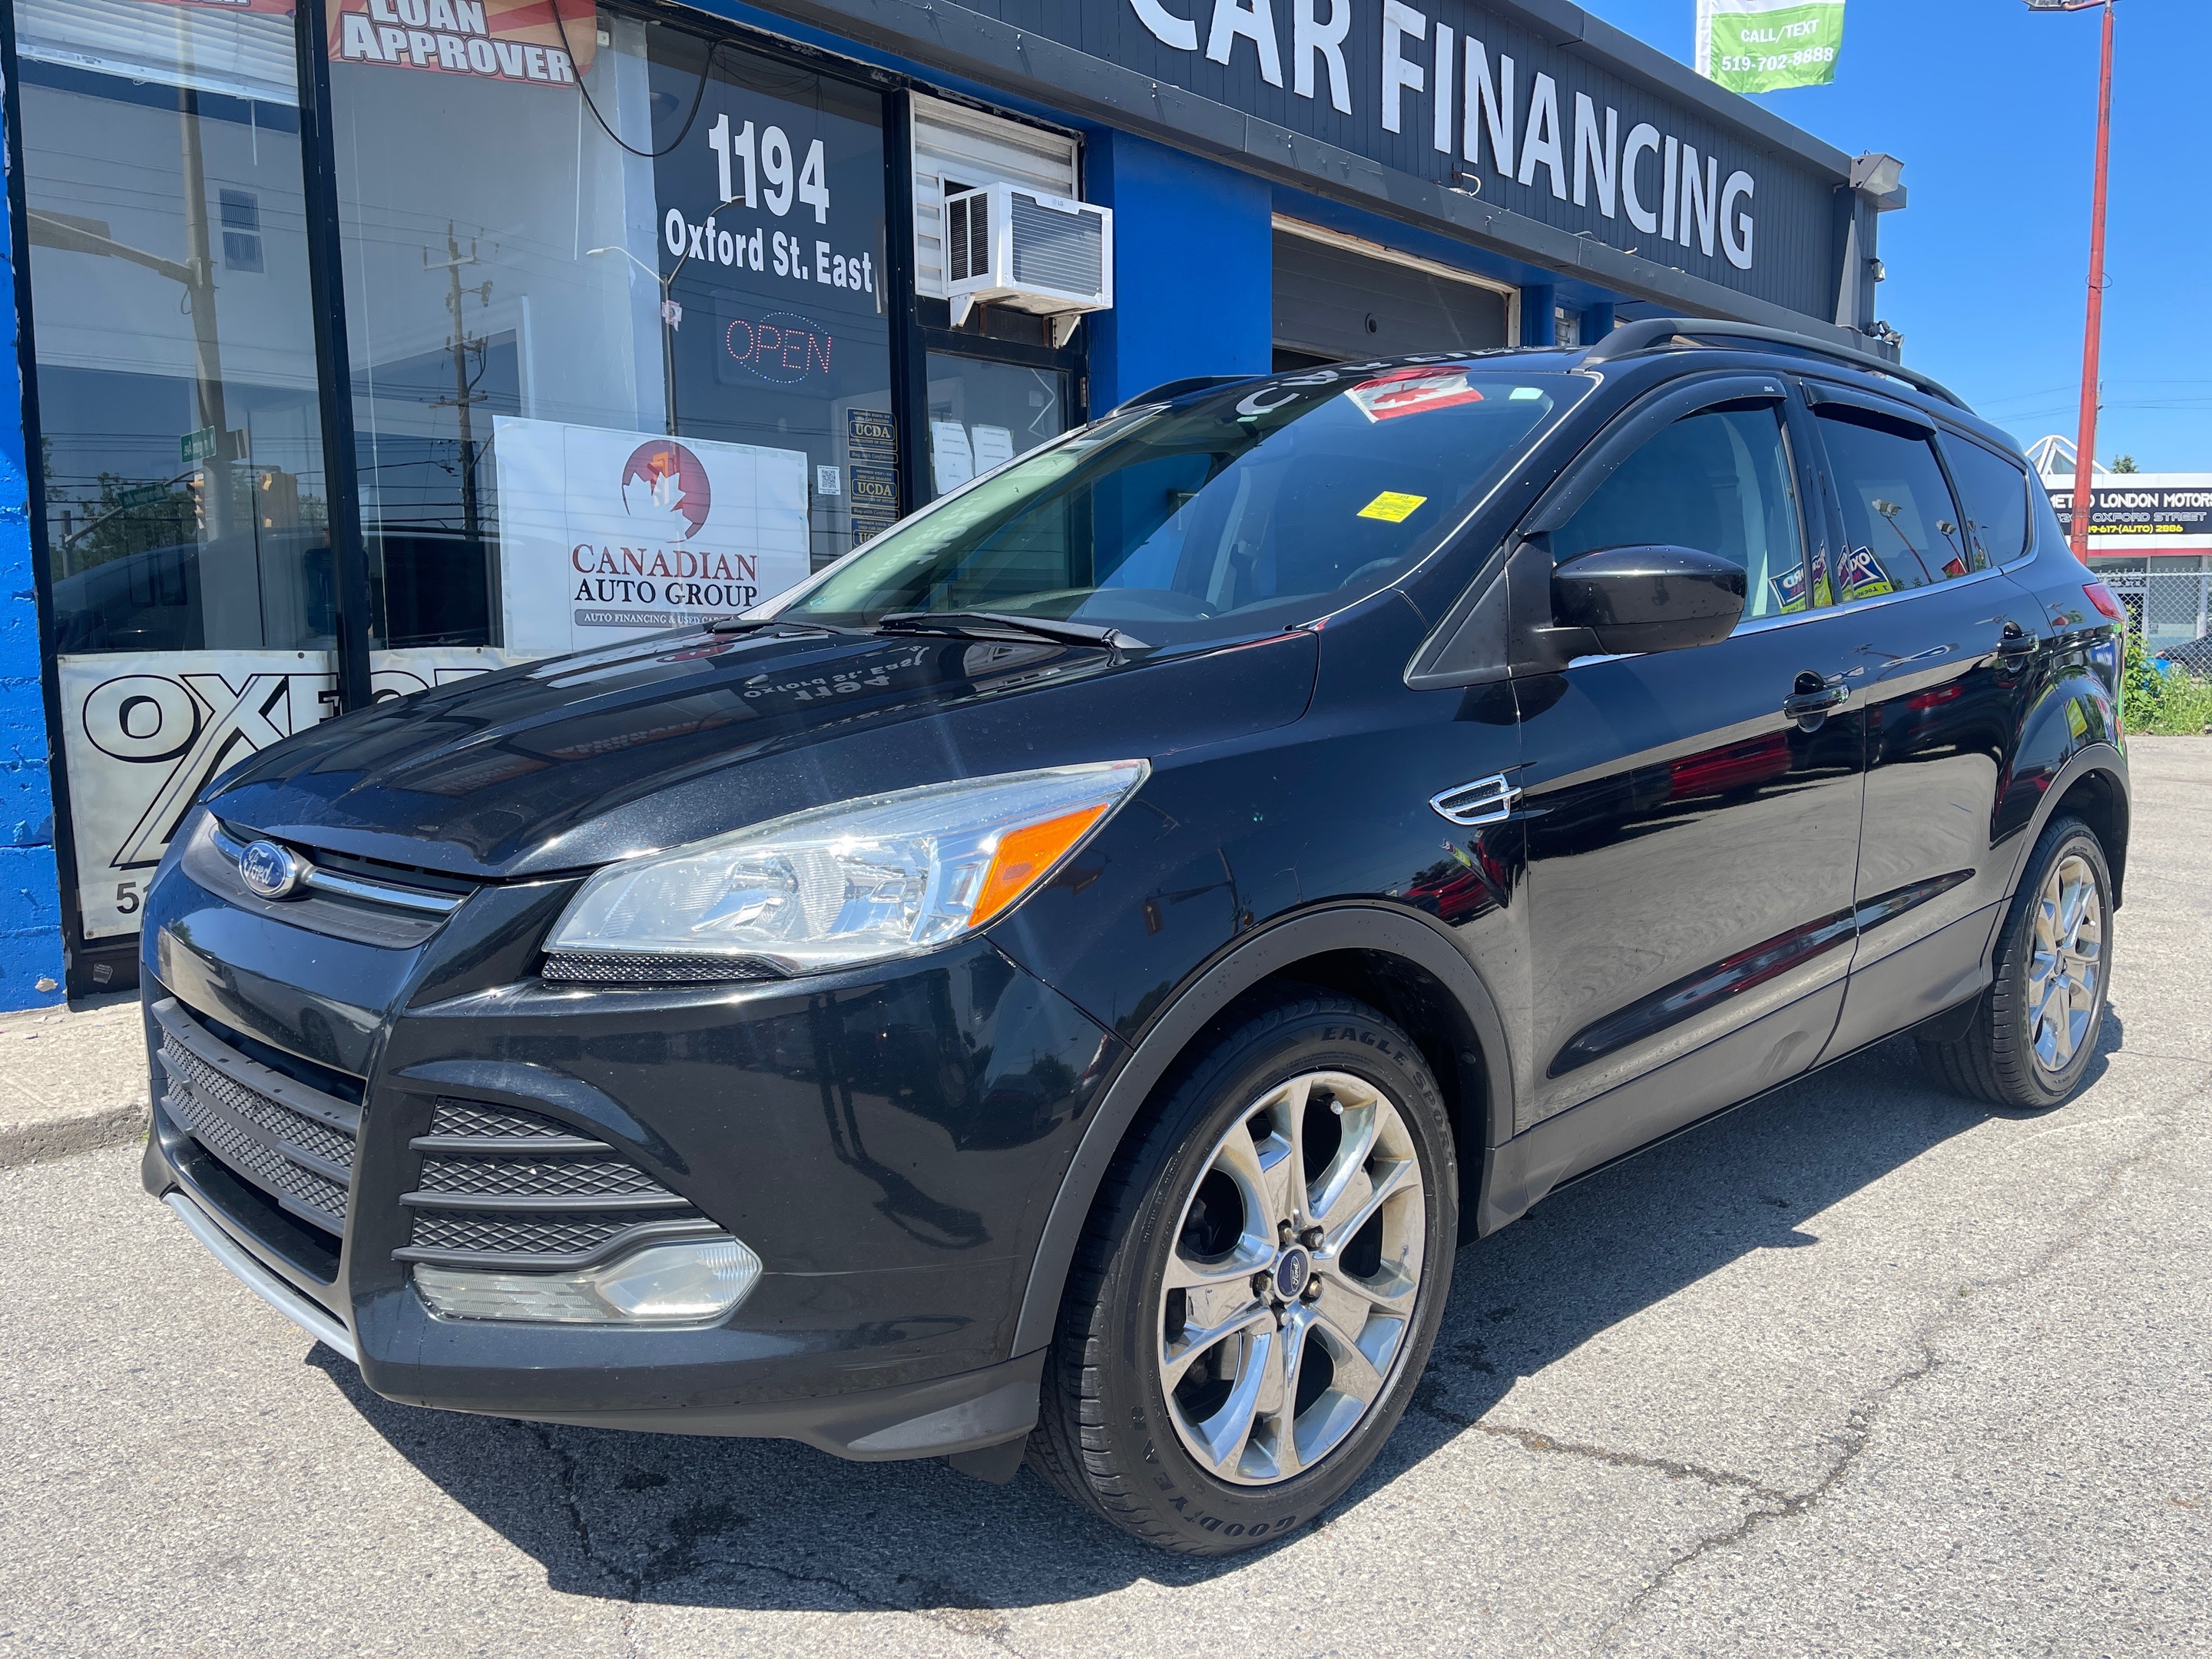 2014 Ford Escape WE FINANCE ALL CREDIT 700+ VEHICLES IN STOCK